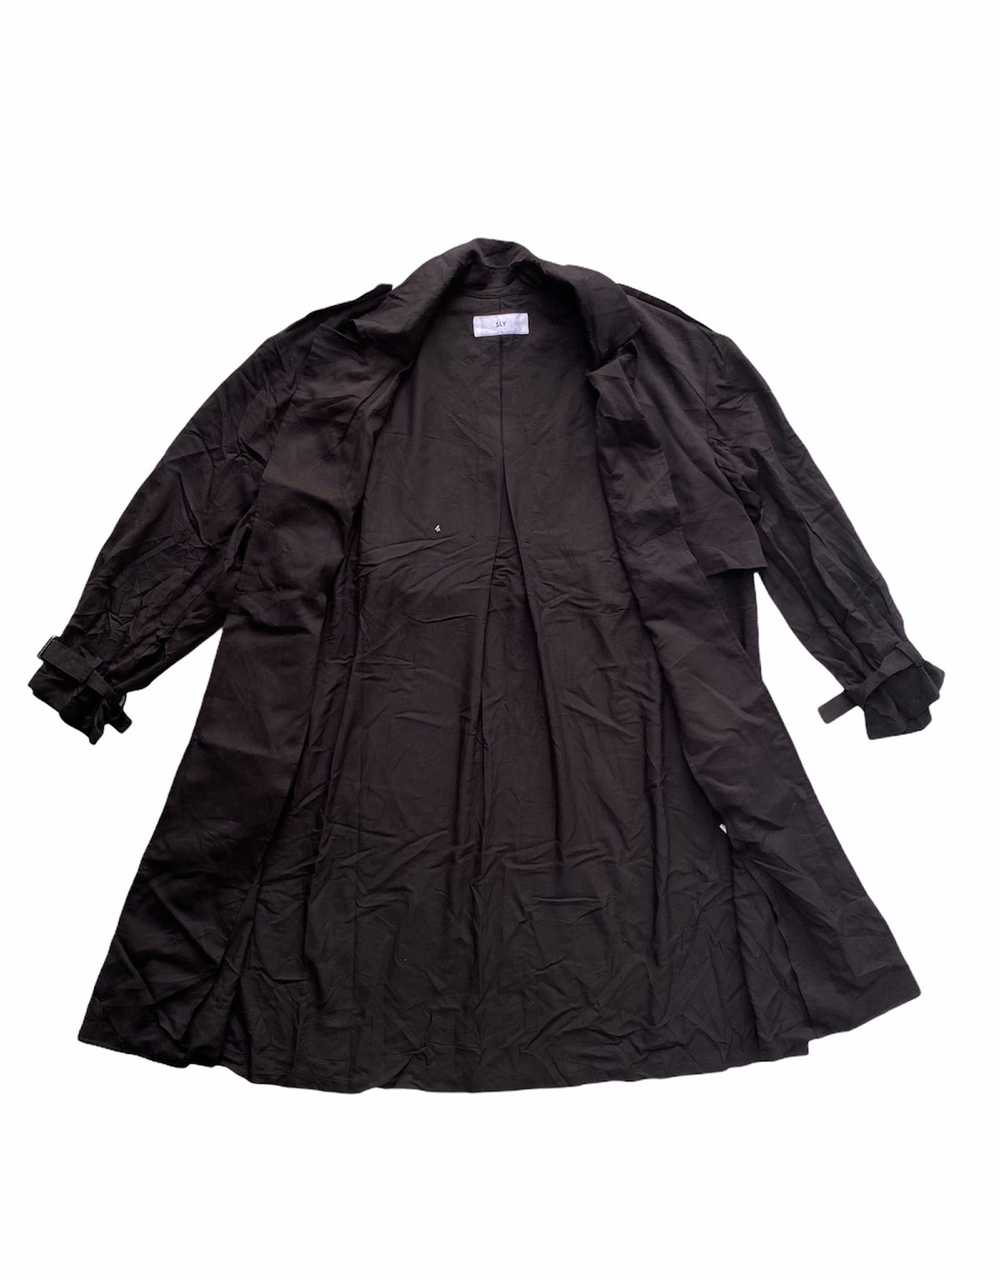 Japanese Brand Vintage Sly Japanese brand trench … - image 1